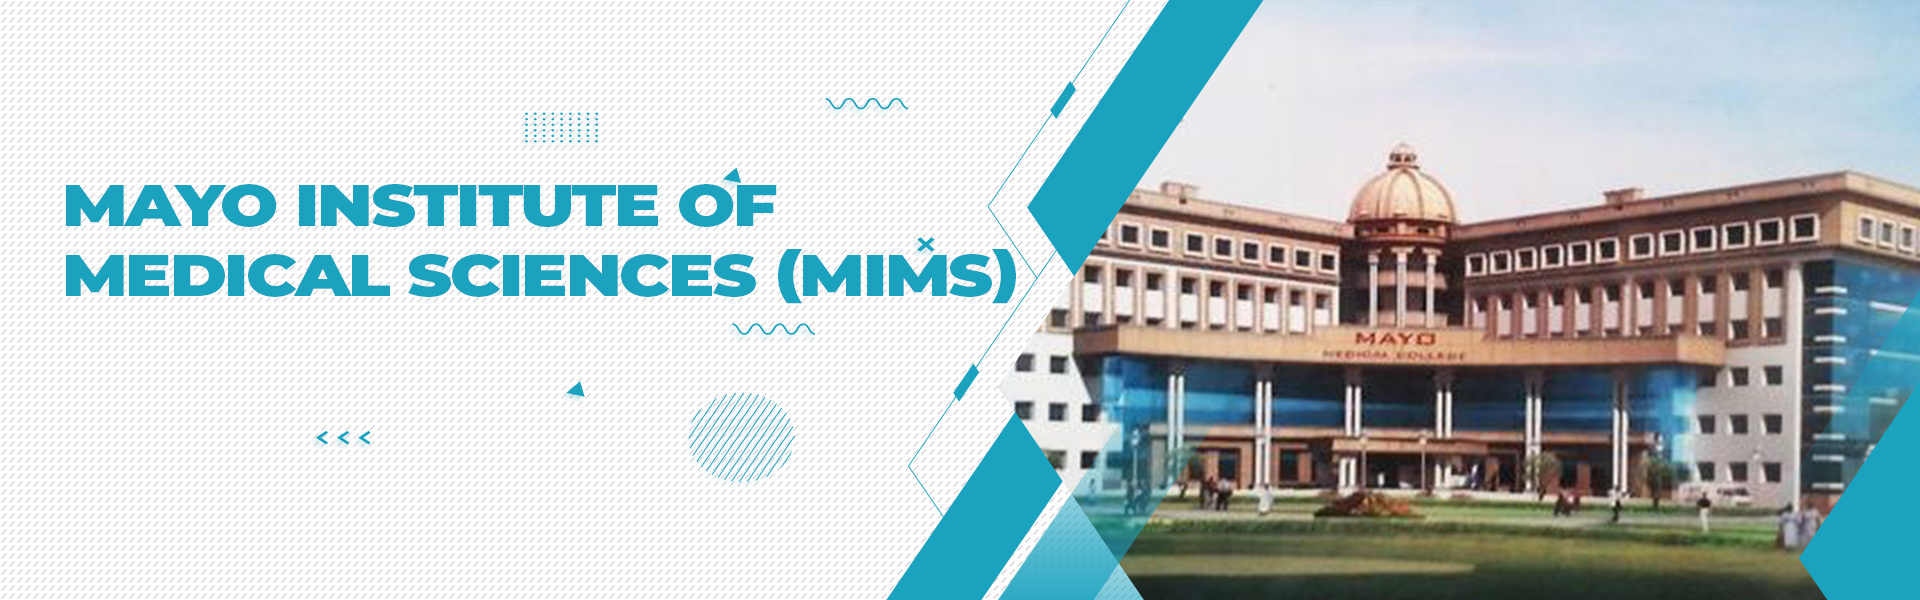 Mayo Institute of Medical Sciences (MIMS)